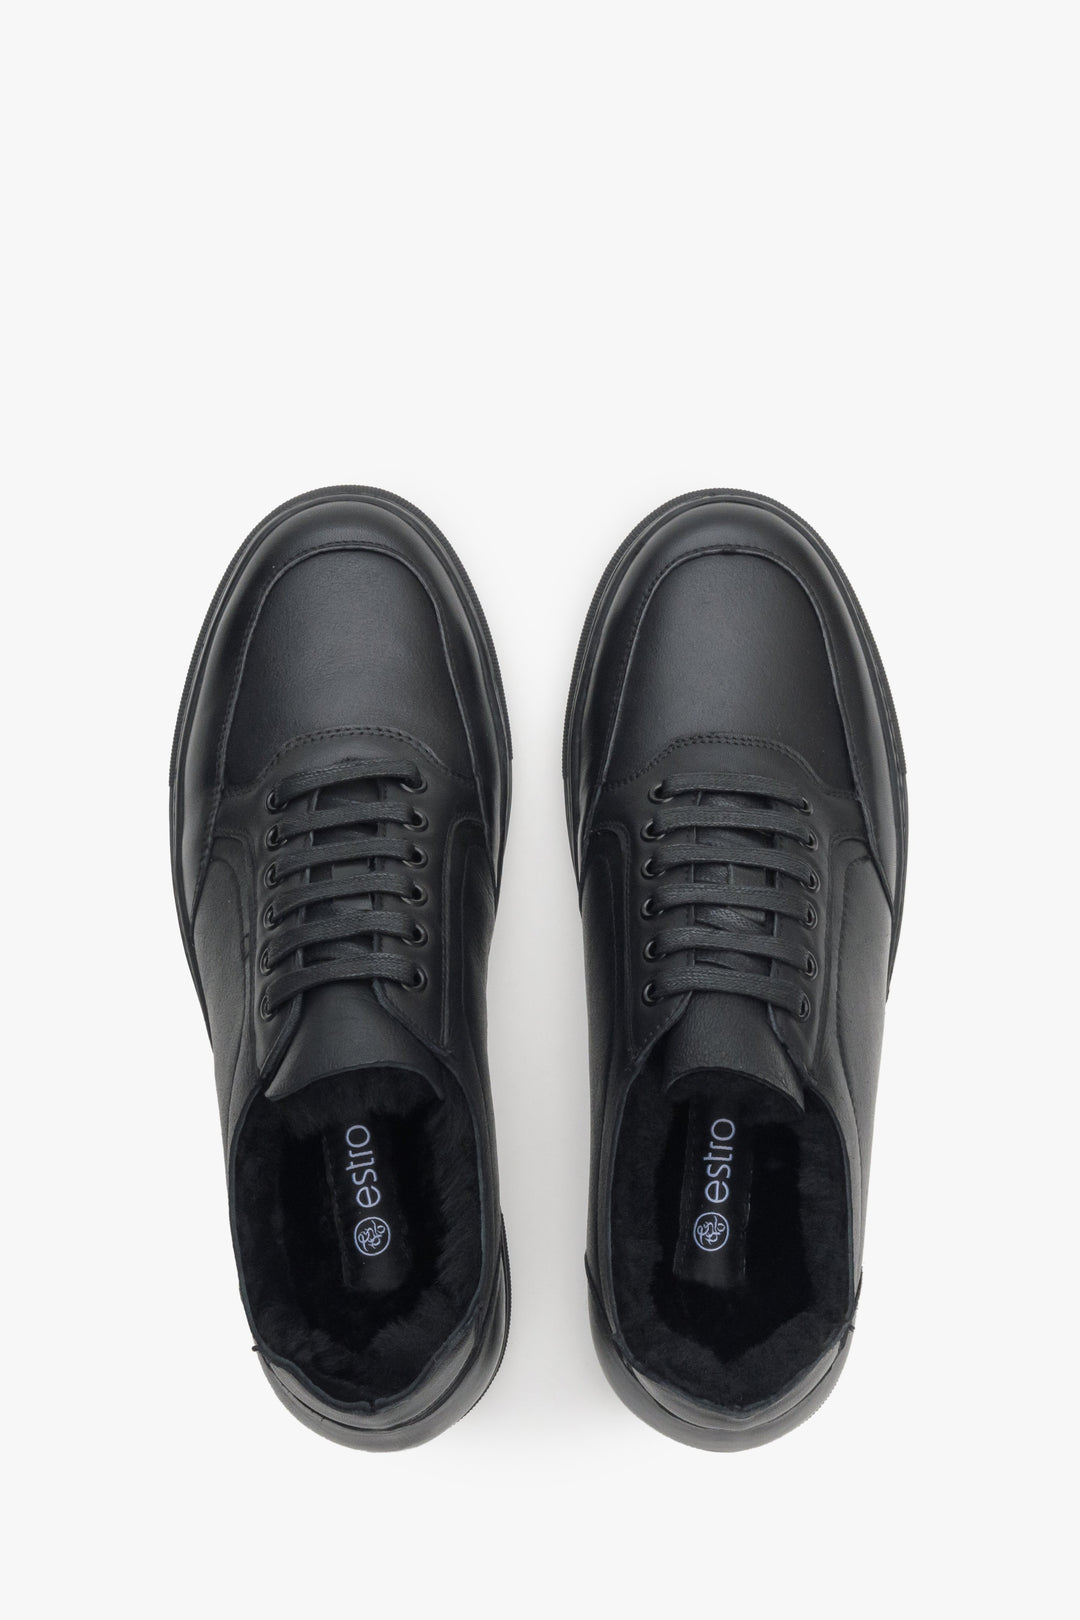 Insulated men's winter sneakers in black by Estro - top view presentation of the model.